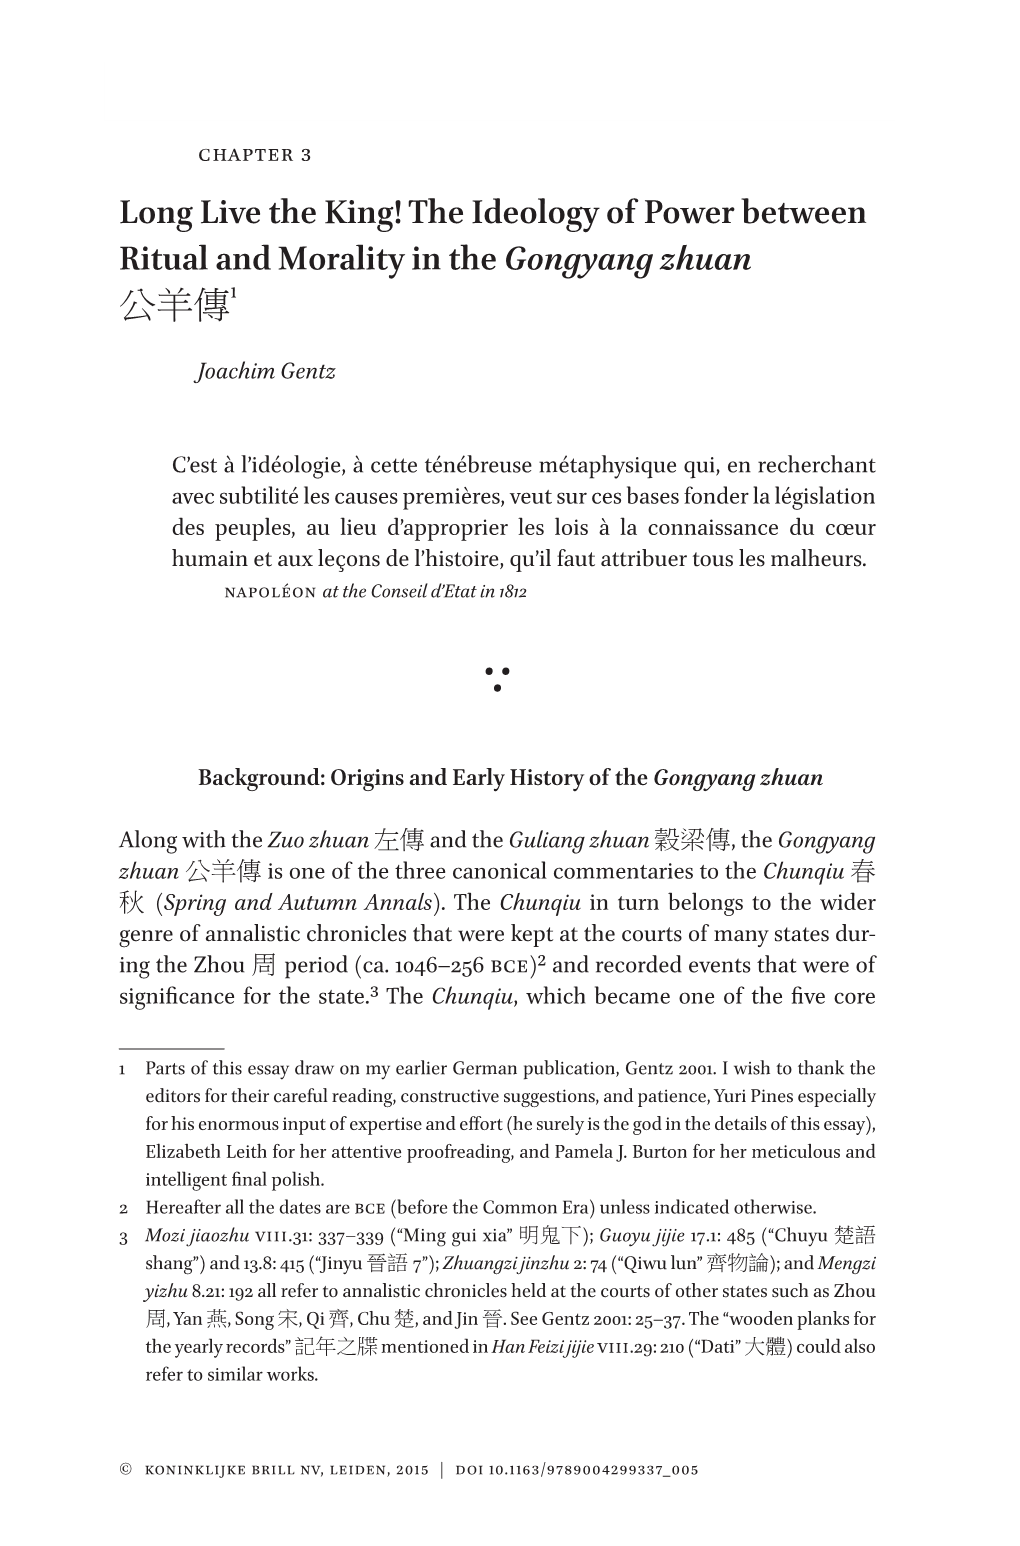 The Ideology of Power Between Ritual and Morality in the Gongyang Zhuan ­ 公羊傳1